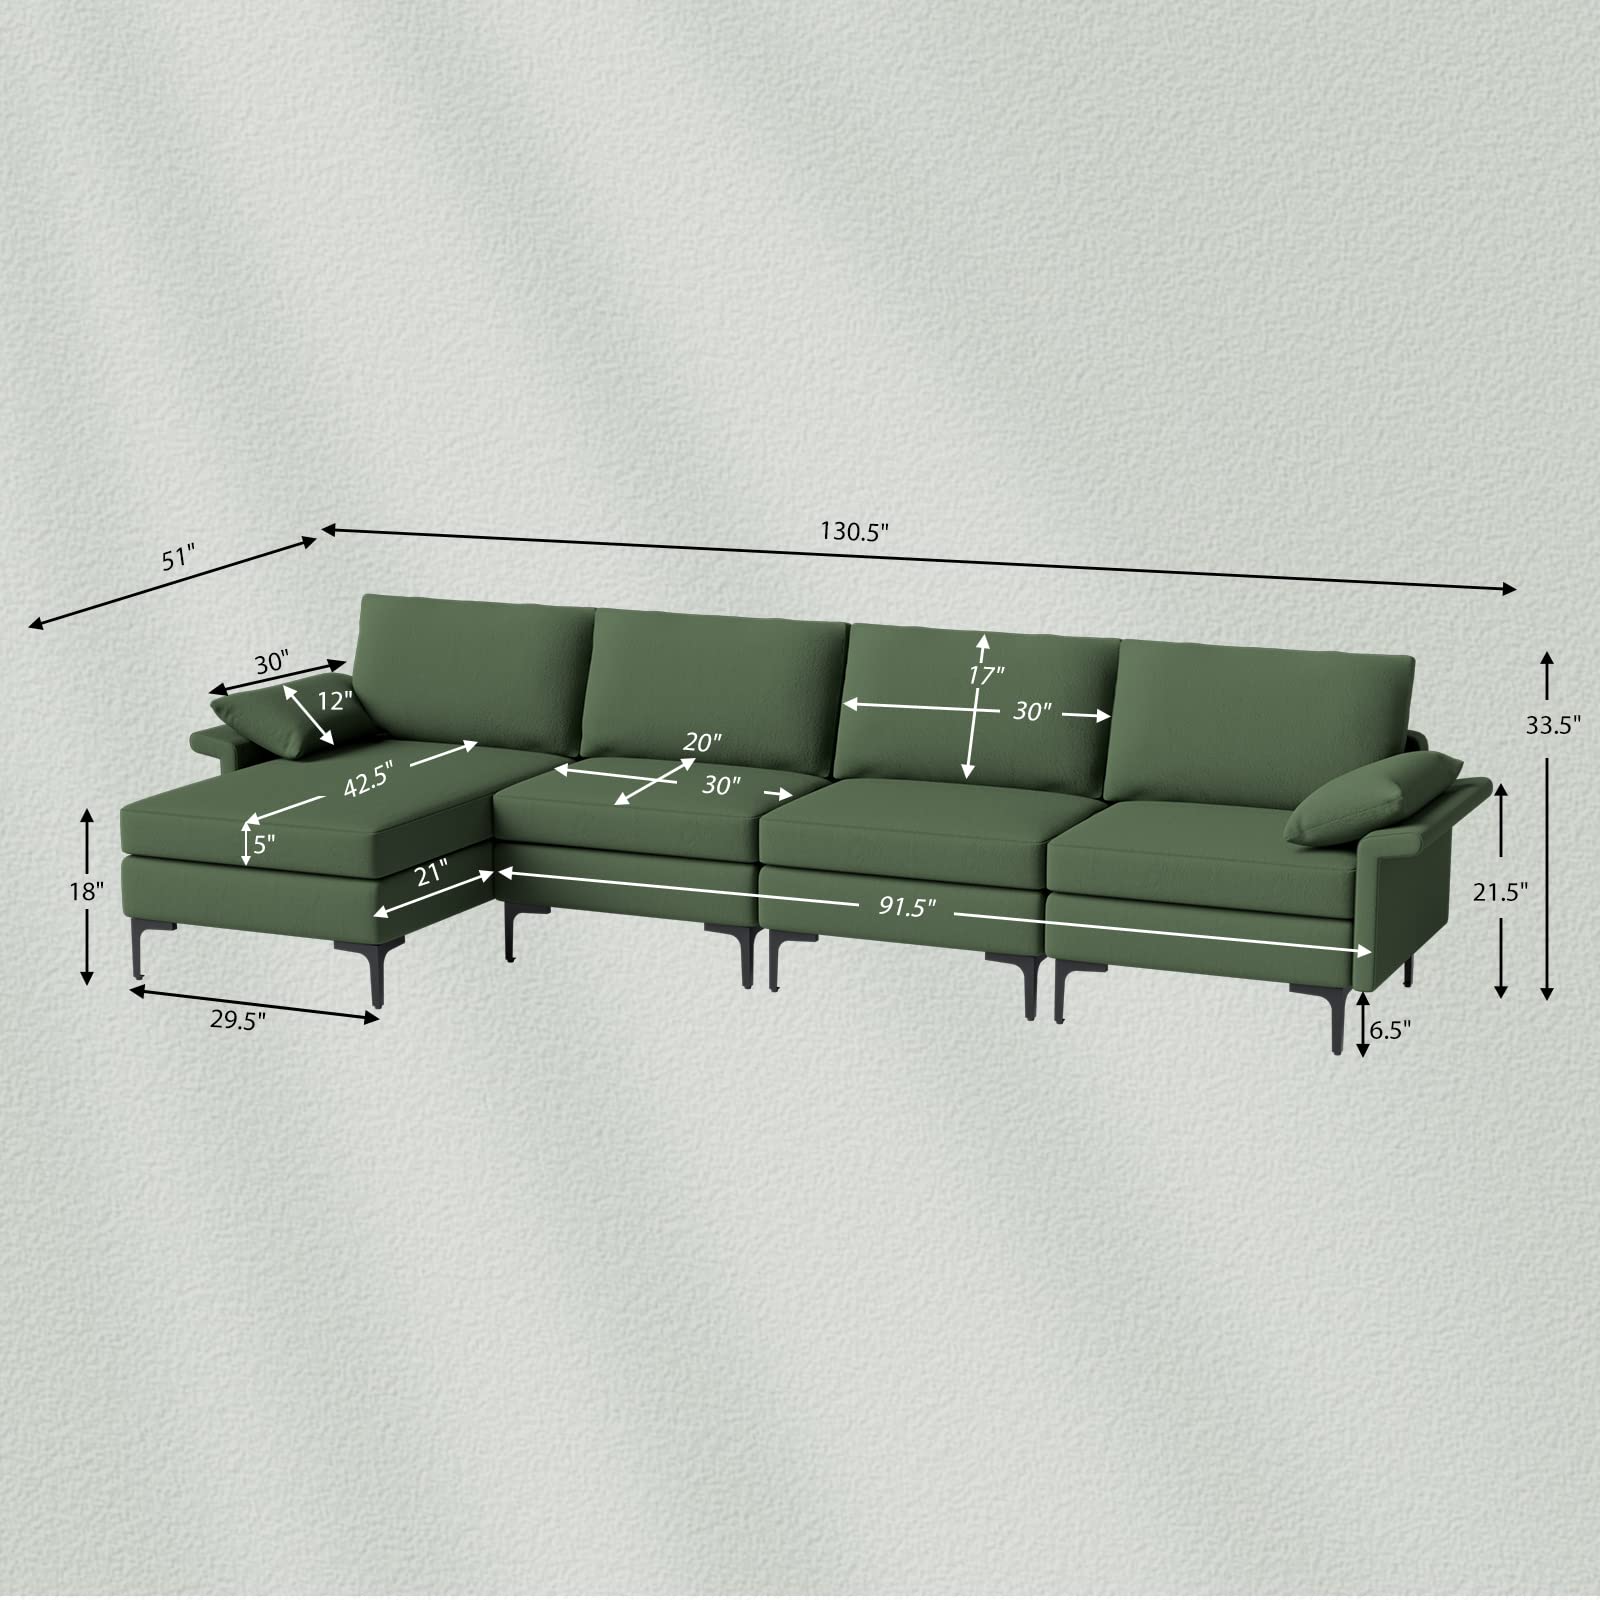 Giantex 130.5" L Convertible Sofa Couch, Sectional Sleeper